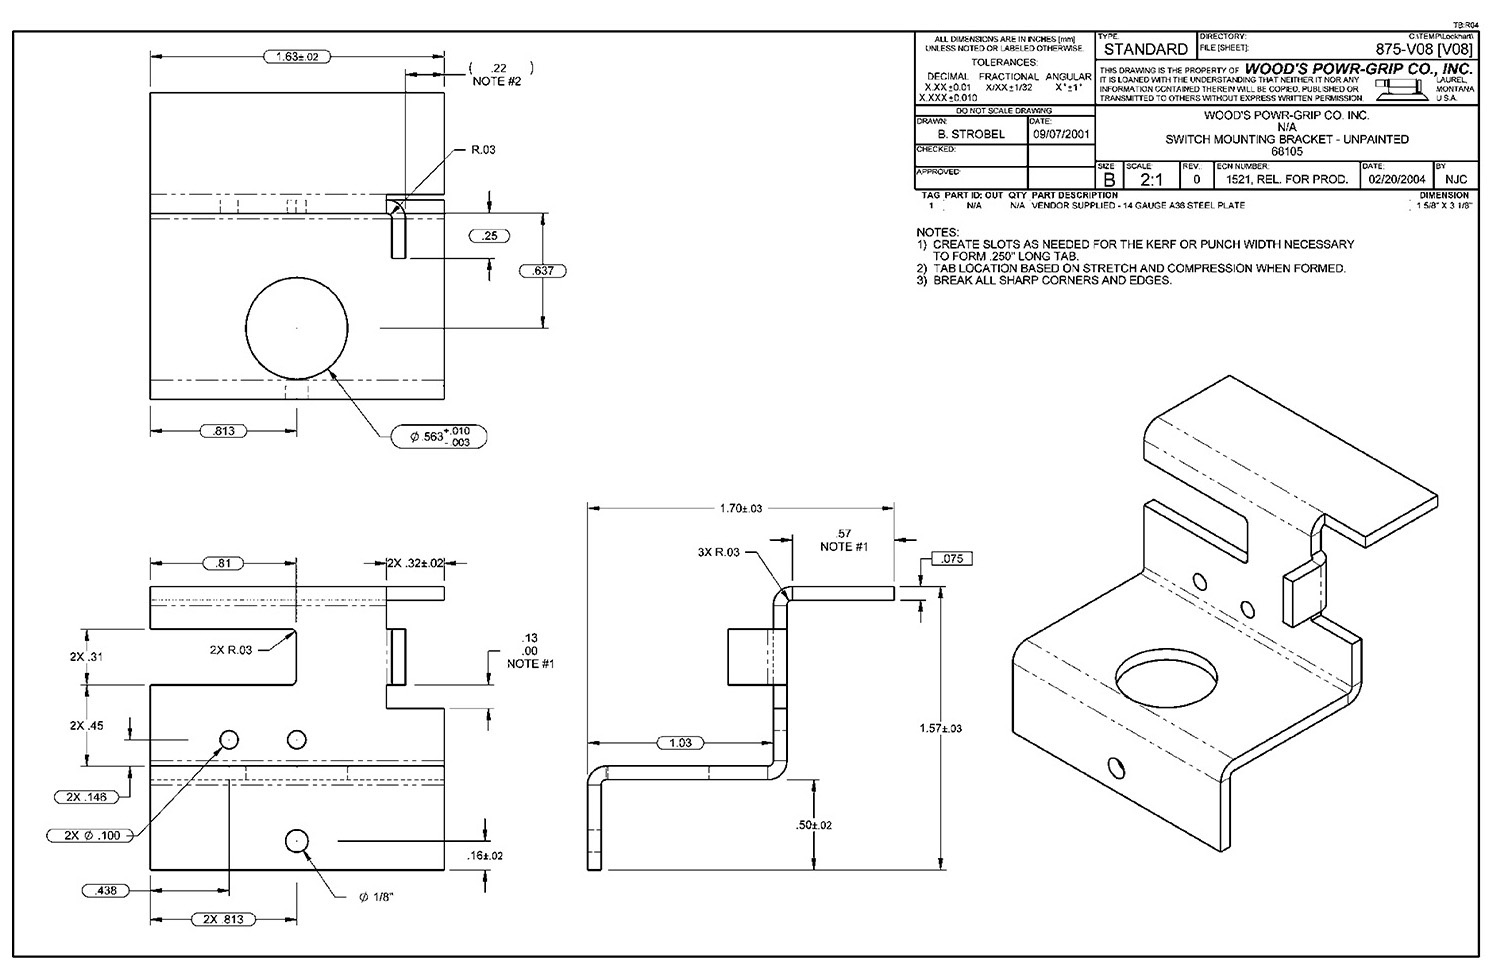 Drawings show the different views of a switch mounting bracket is shown.